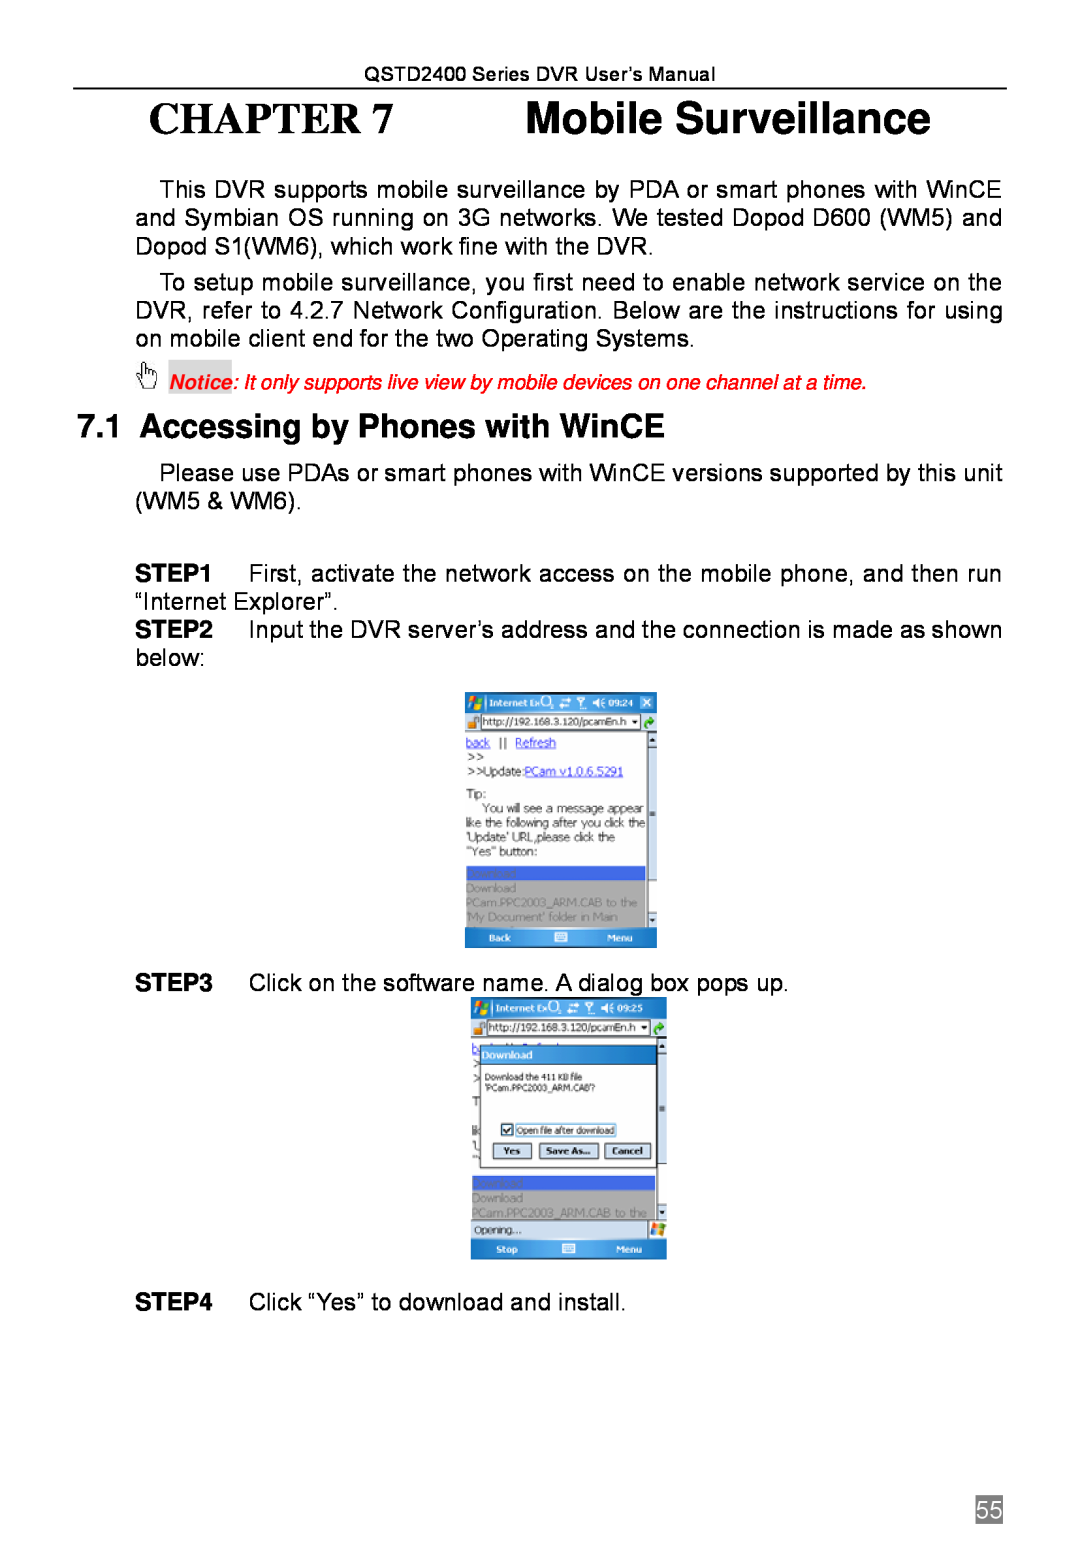 Q-See QSTD2404, QSTD2416, QSTD2408 user manual Accessing by Phones with WinCE, Mobile Surveillance 